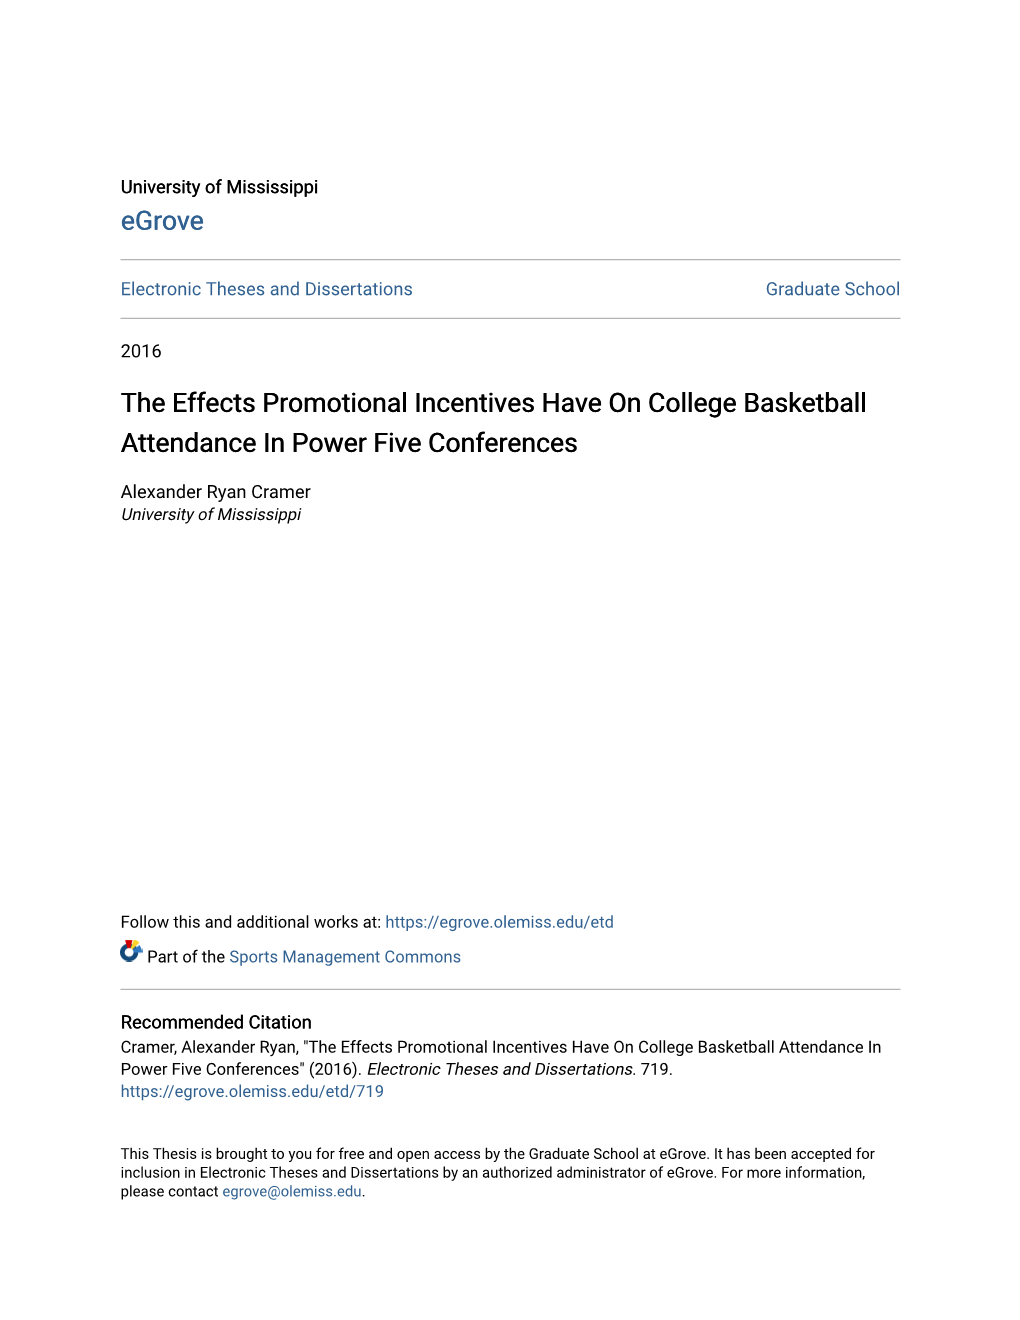 The Effects Promotional Incentives Have on College Basketball Attendance in Power Five Conferences